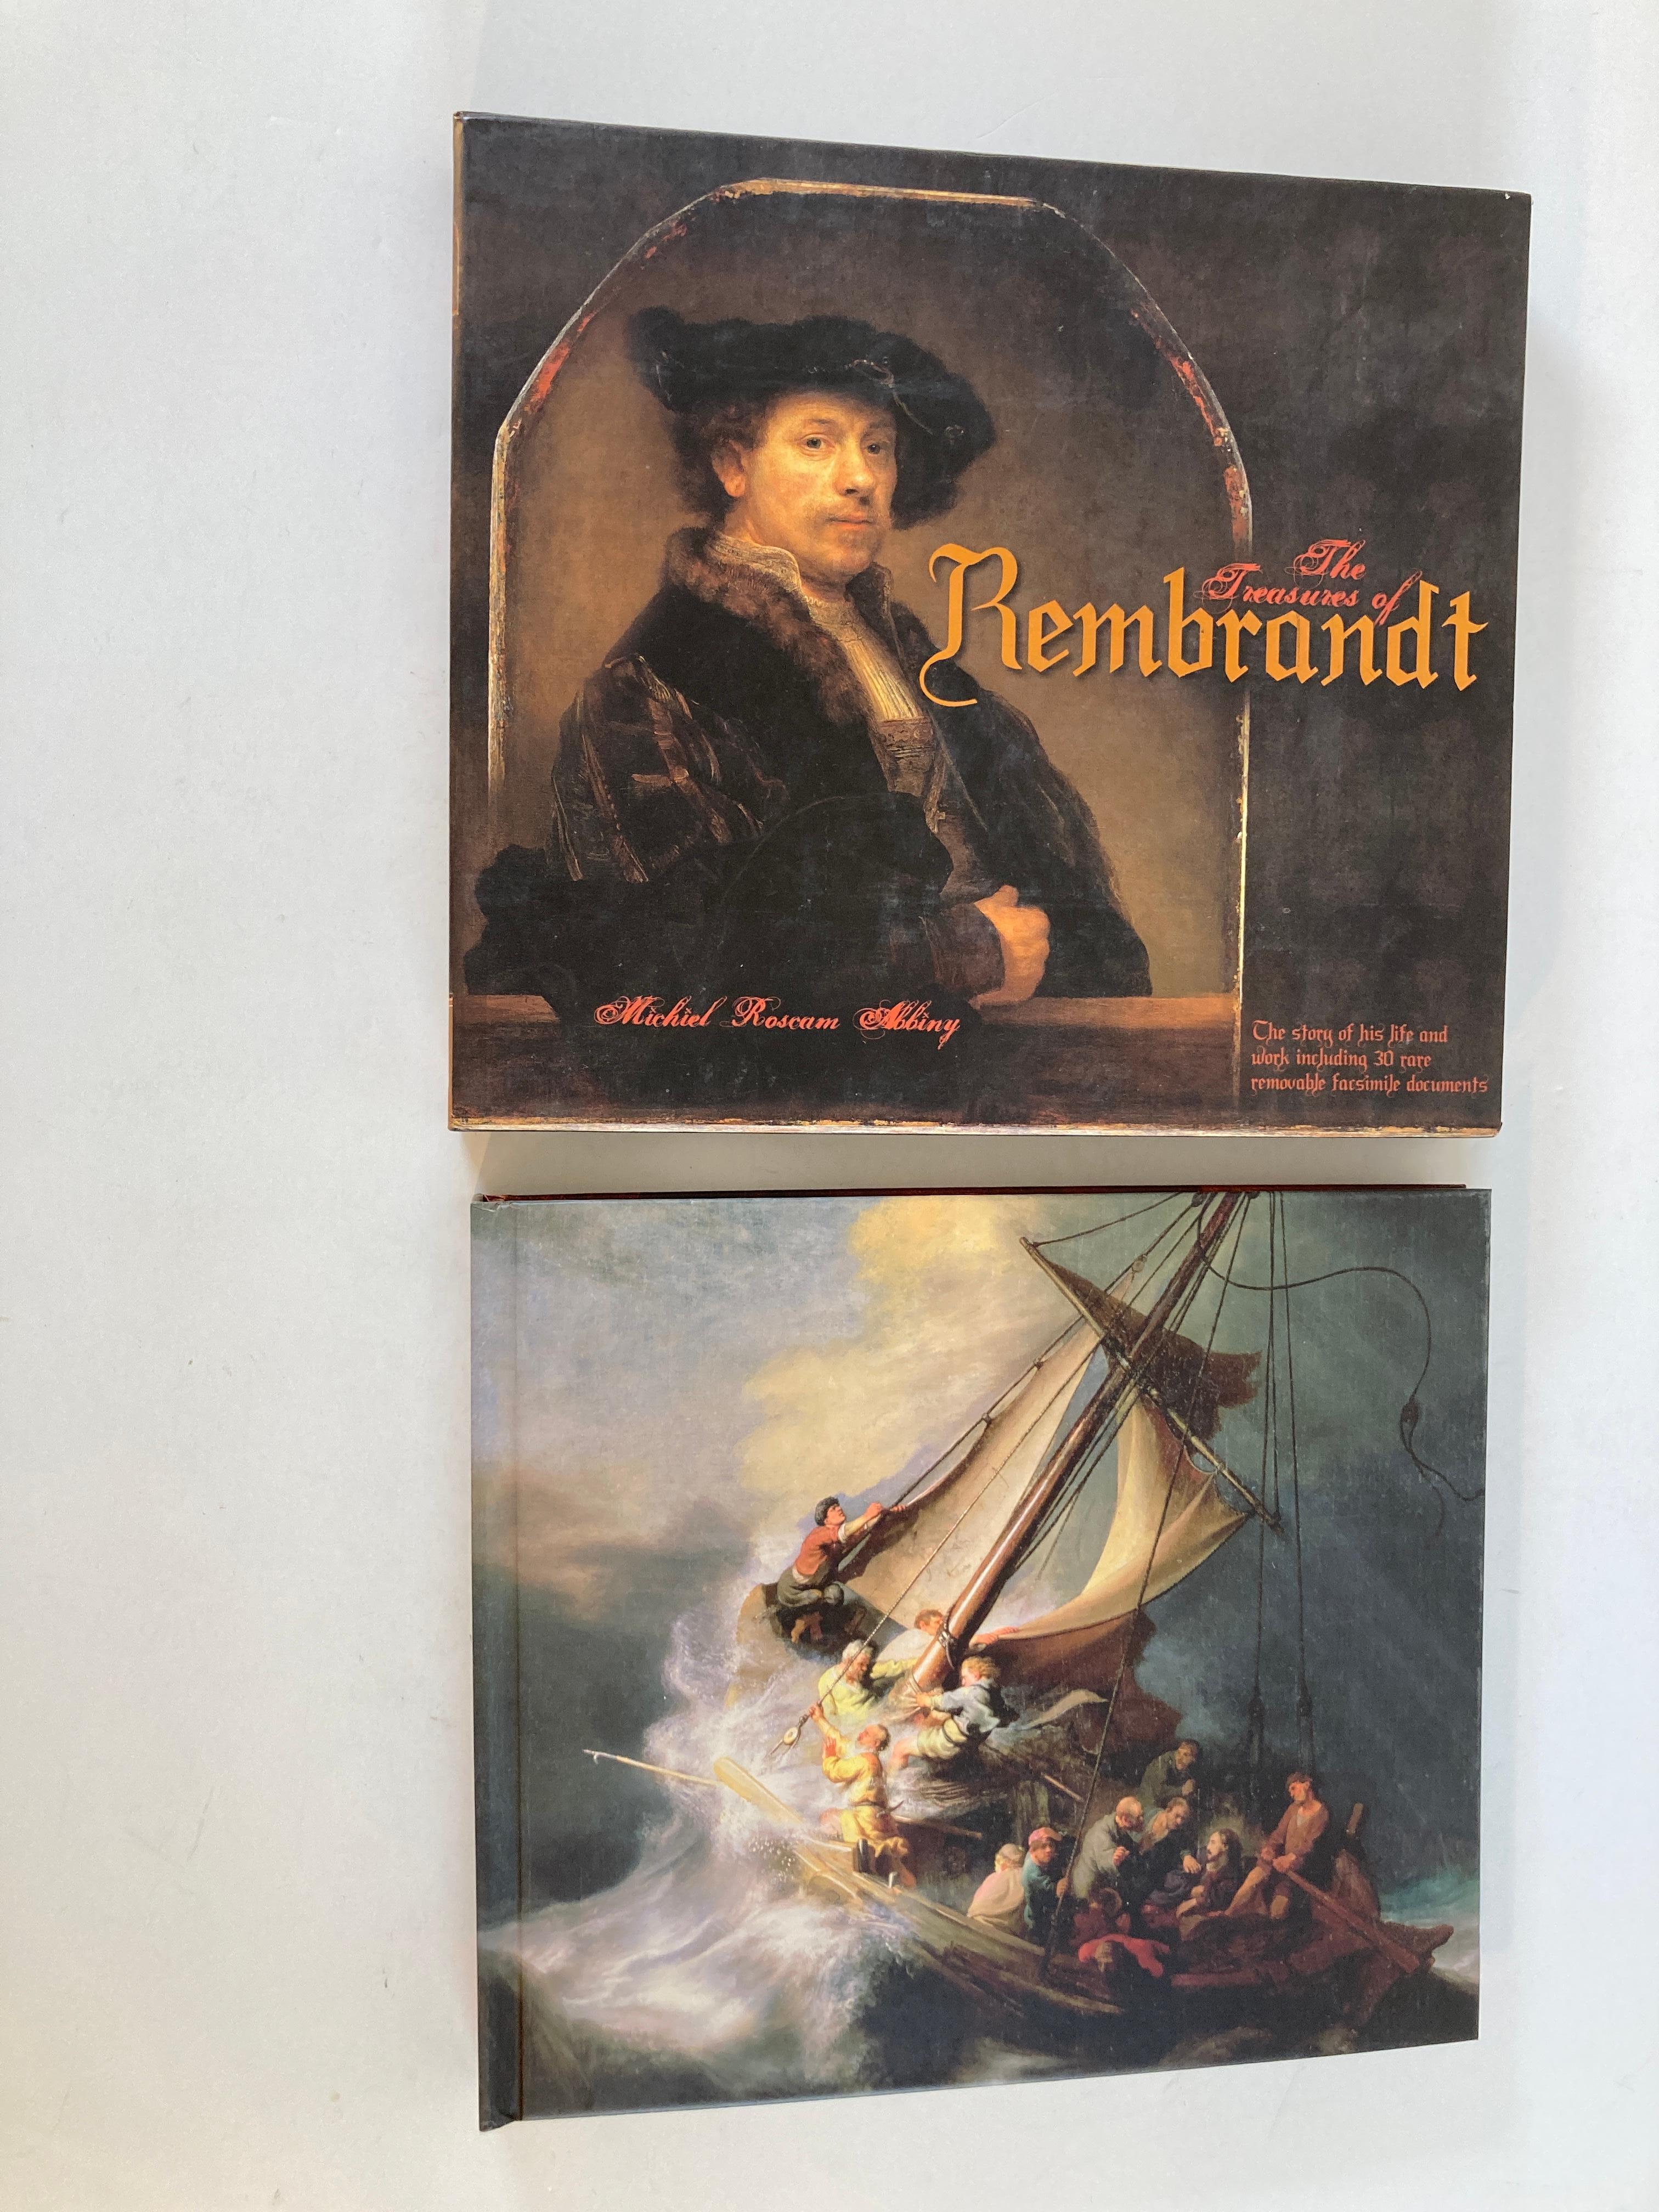 Belgian The Treasures of Rembrandt Book by Michiel Roscam Abbing Art Gallery Book For Sale